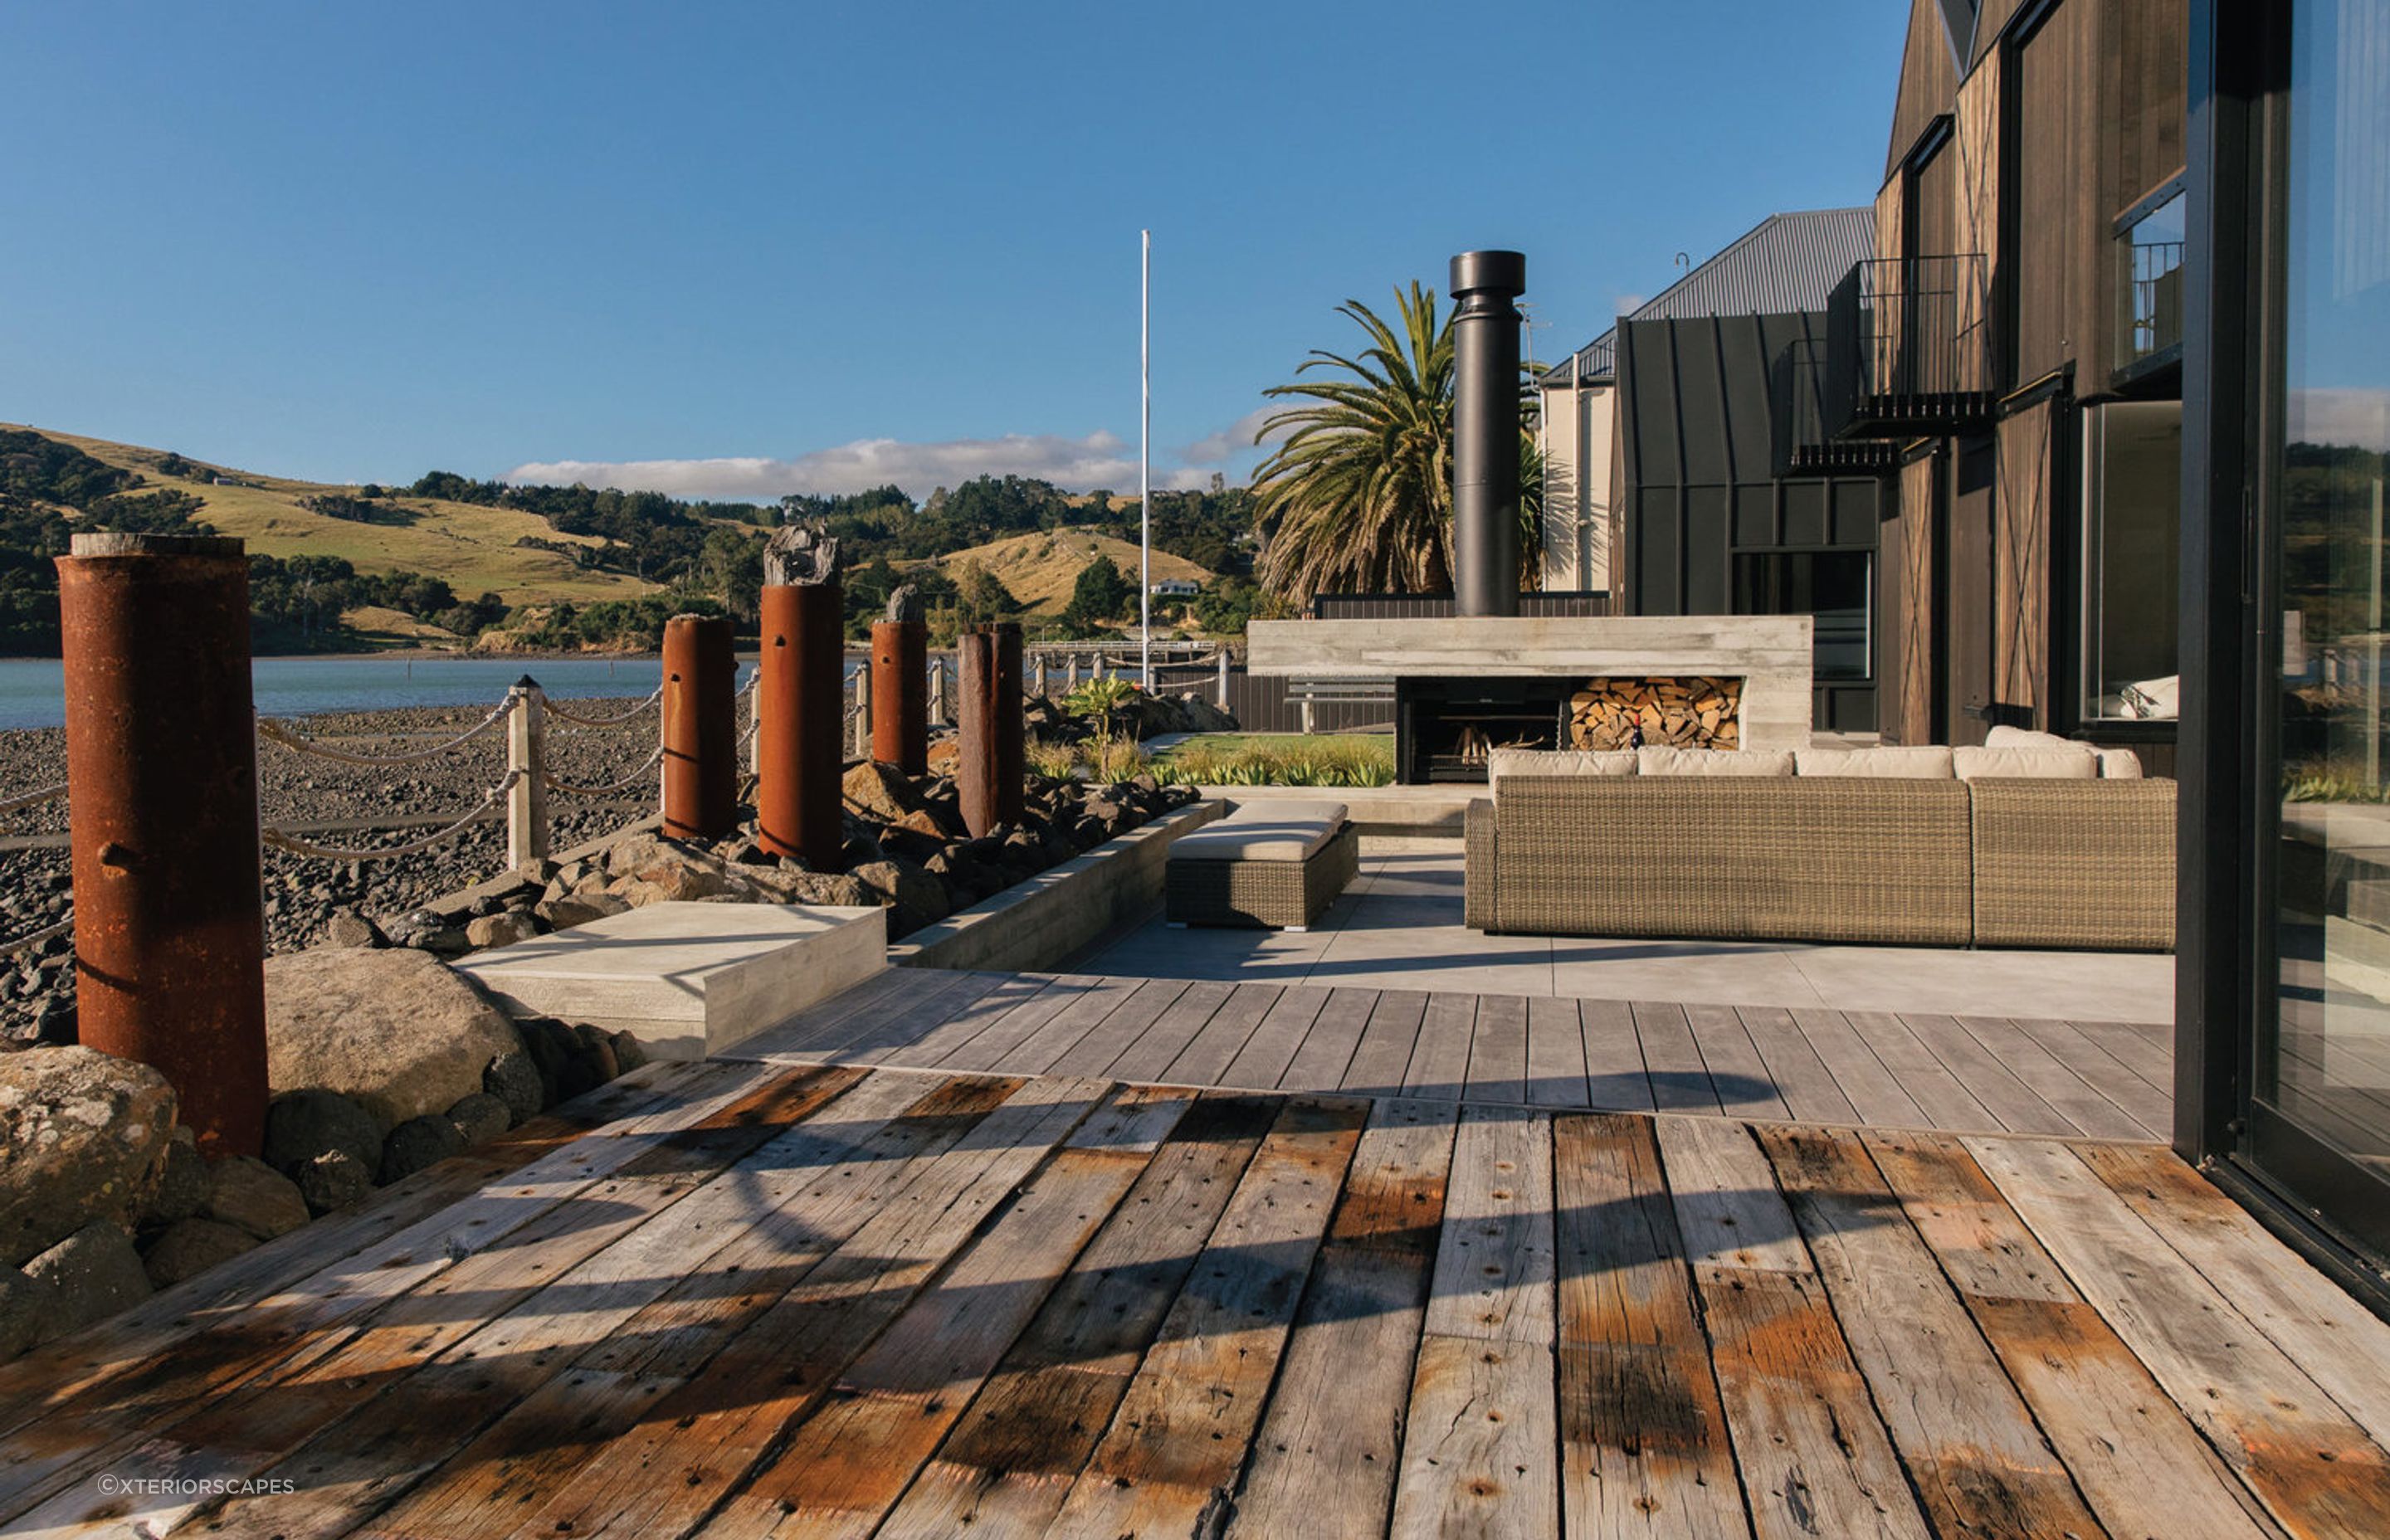 A sunken seating area, like this in this exquisite Akaroa residence, provides a cosy and intimate social space.